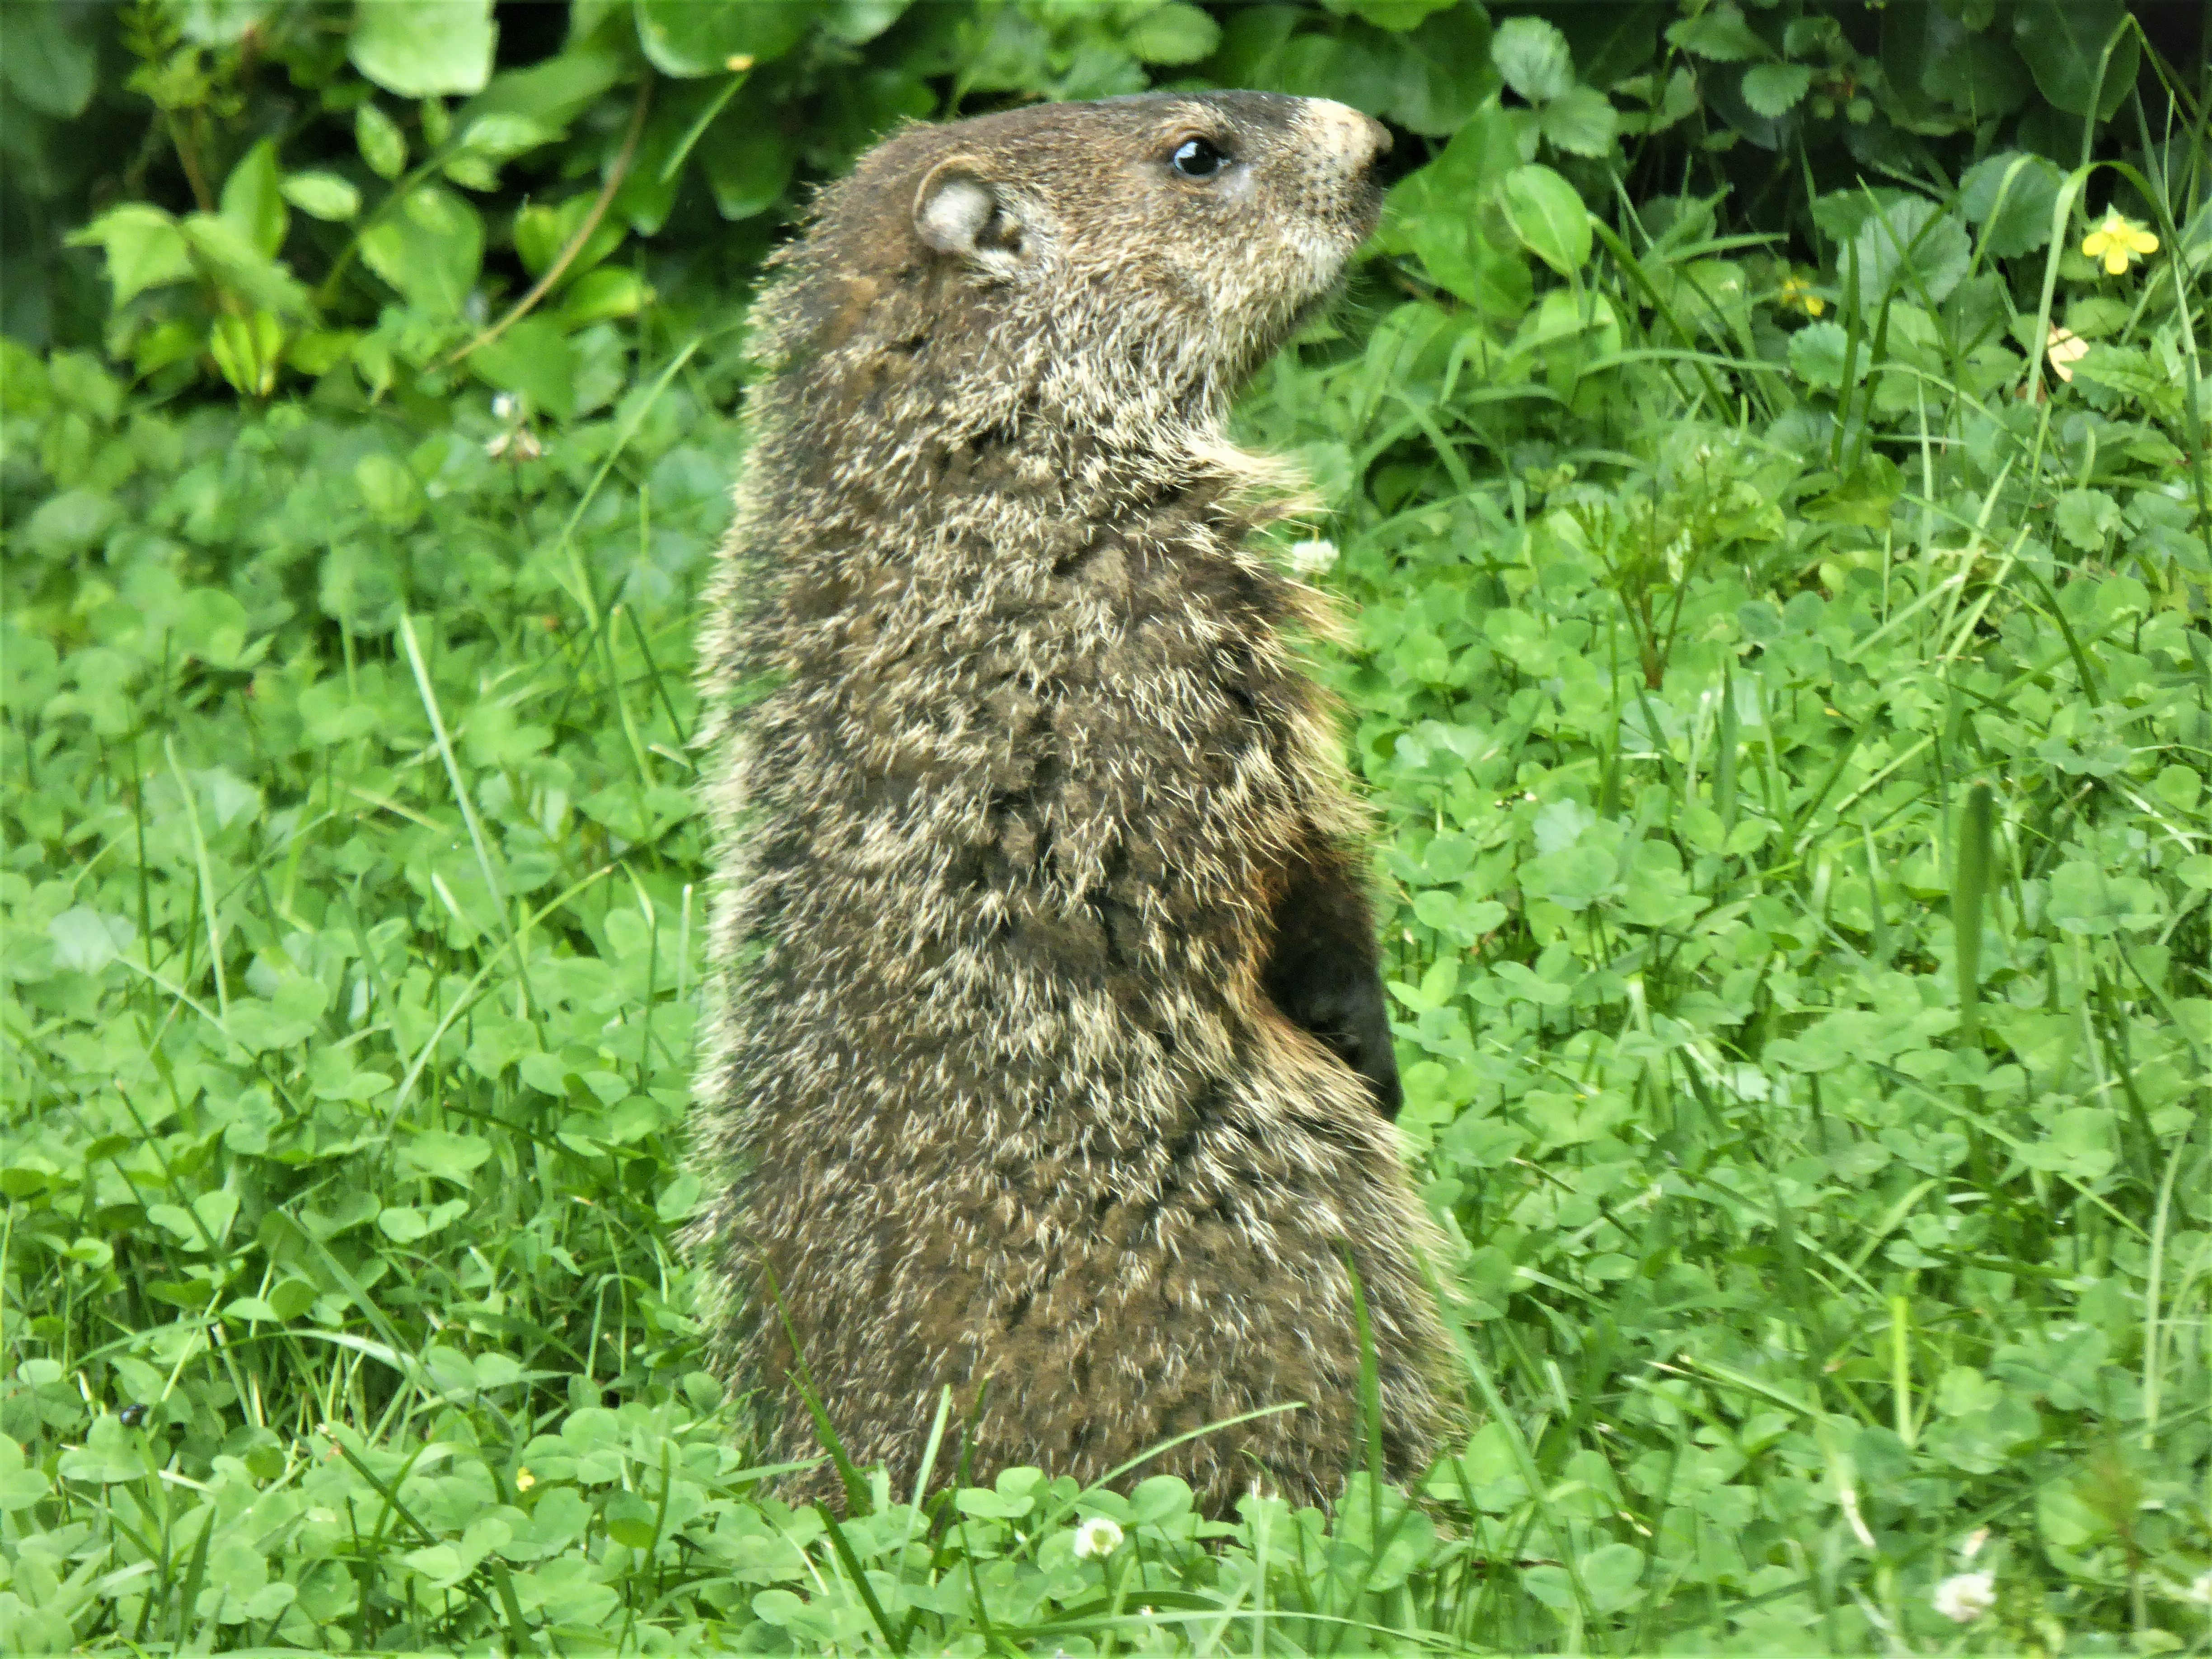 Gretel the groundhog standing on the lush lawn surrounded by clover